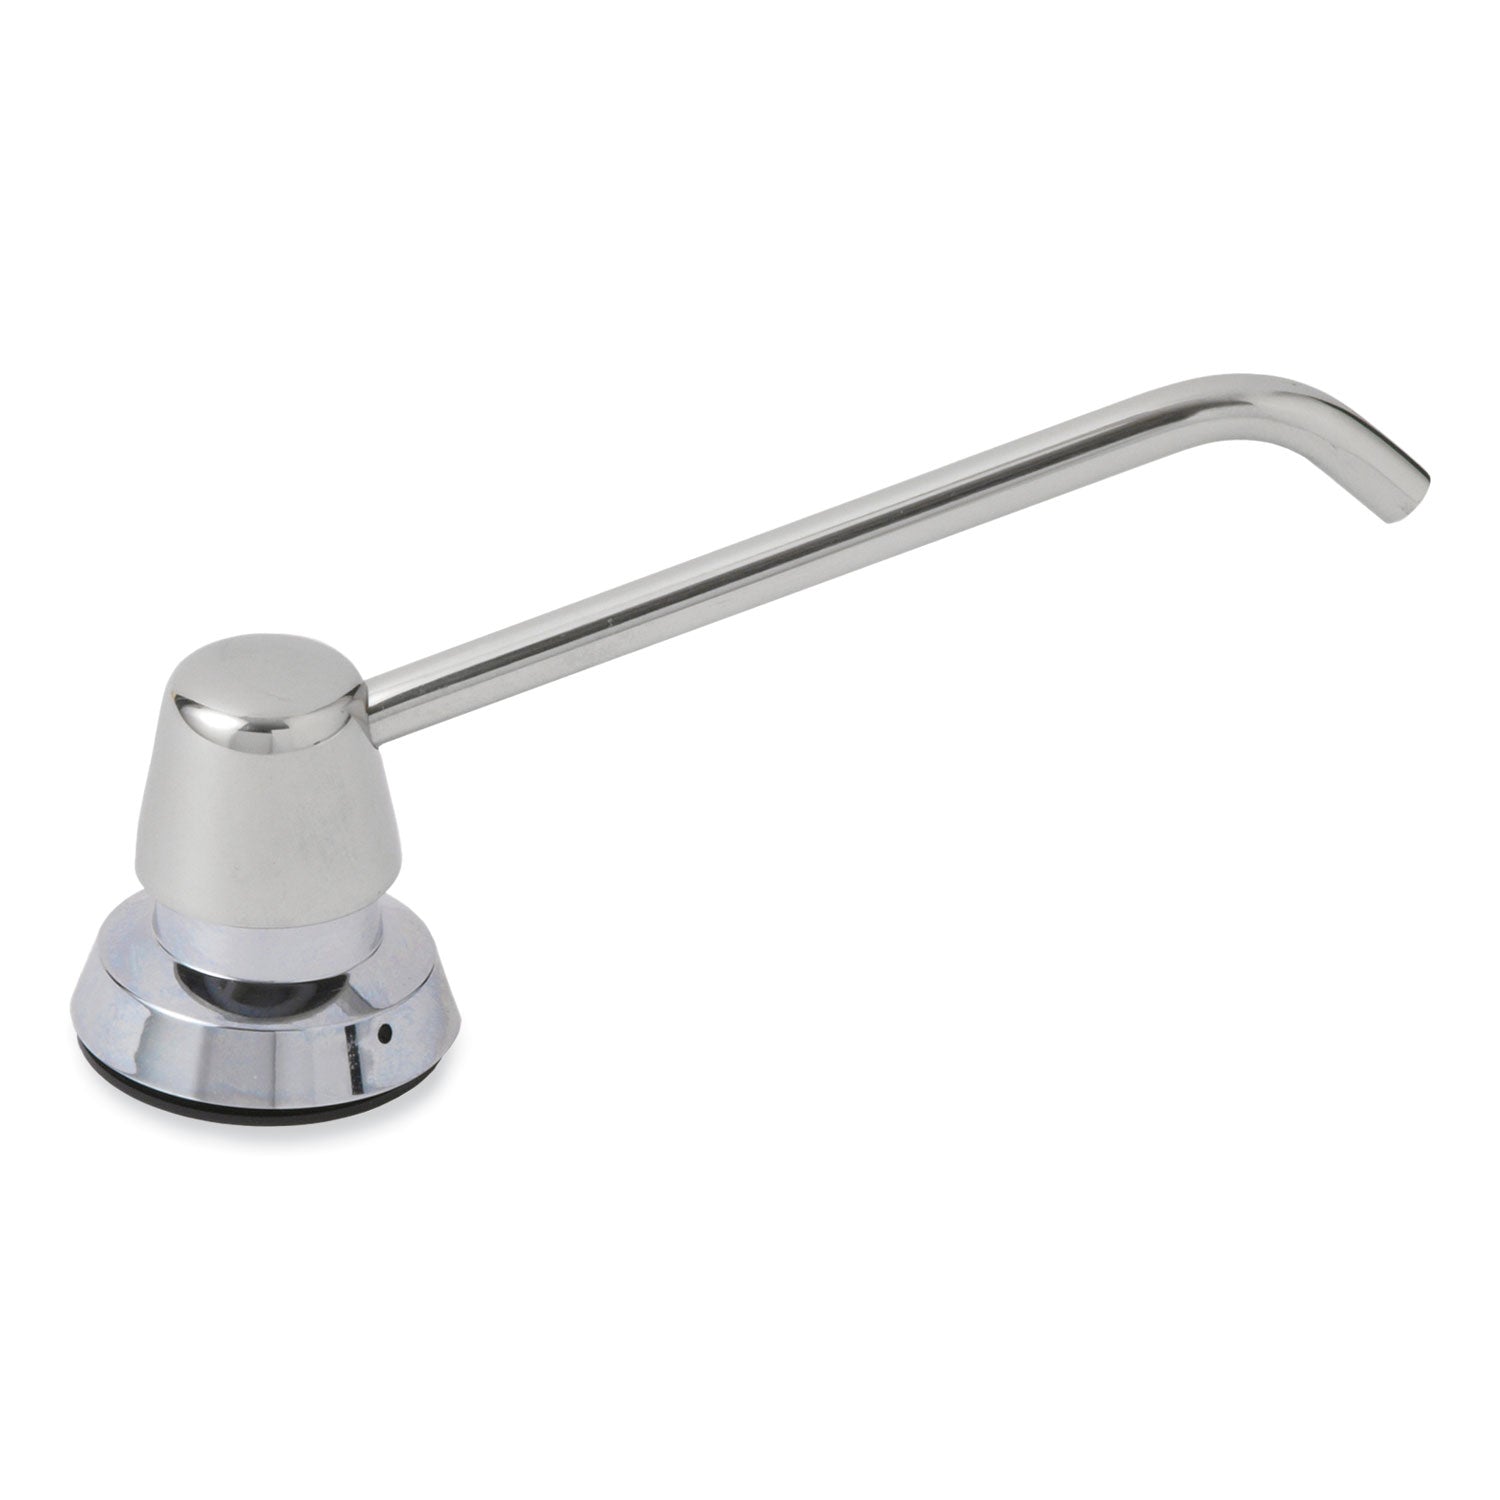 counter-mounted-soap-dispenser-34-oz-3-x-4-x-6-stainless-steel_bob8226 - 1